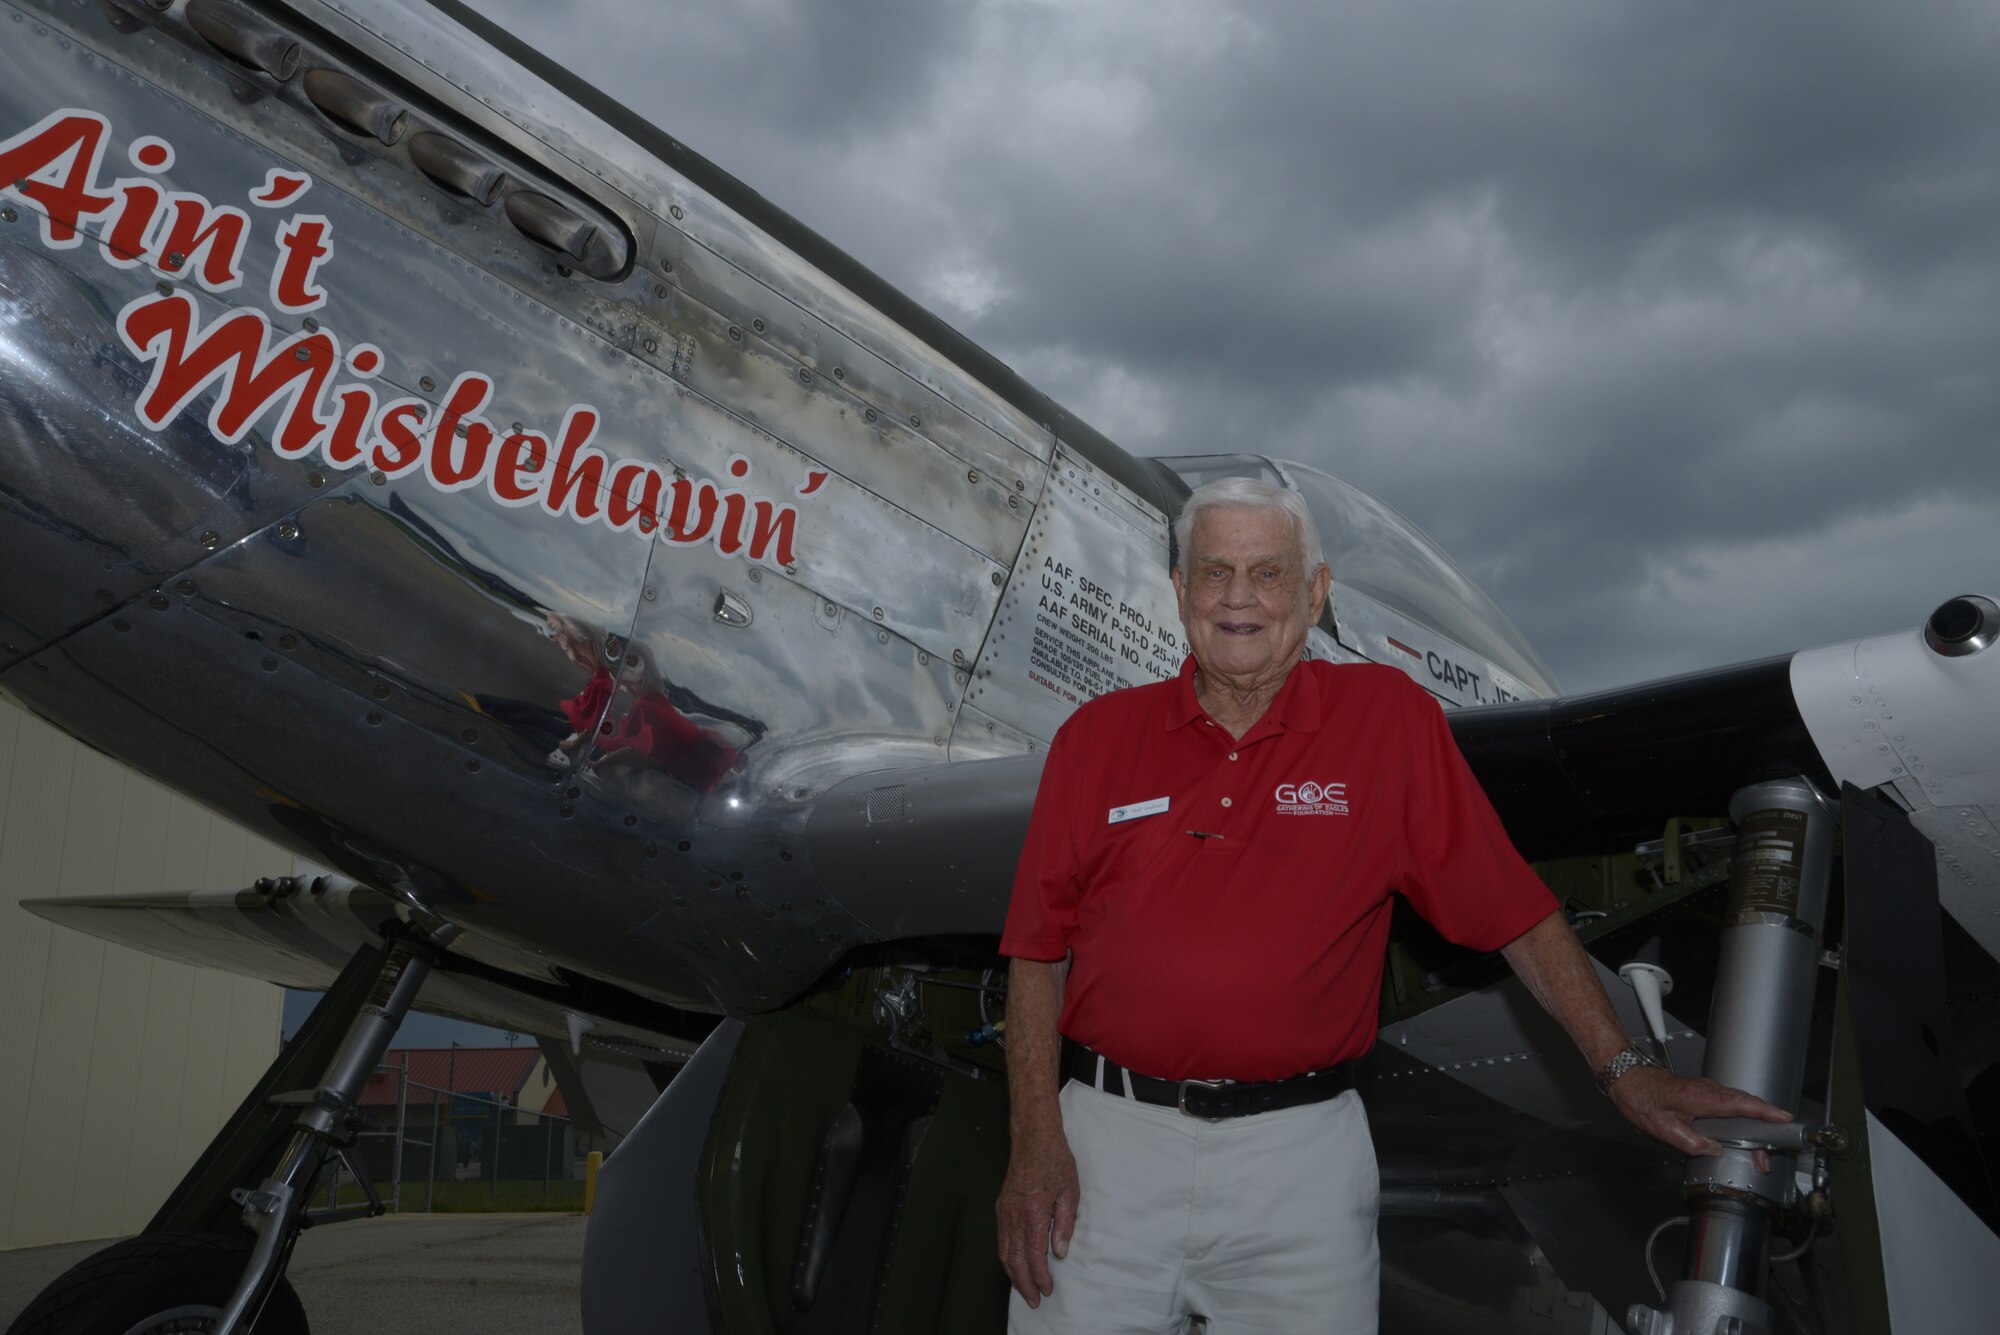 Col. Clarence “Bud” Anderson (retired) stands in front of a P-51 Mustang  during the Gathering of Eagles annual event at Maxwell Air Force Base, June 6, 2014. Anderson, who is a triple Ace from WWII, flew a P-51 Mustang during the allied invasion of Normandy 70 years ago to the day, known as D-Day. (U.S. Air Force photo by Staff Sgt. Gregory Brook)